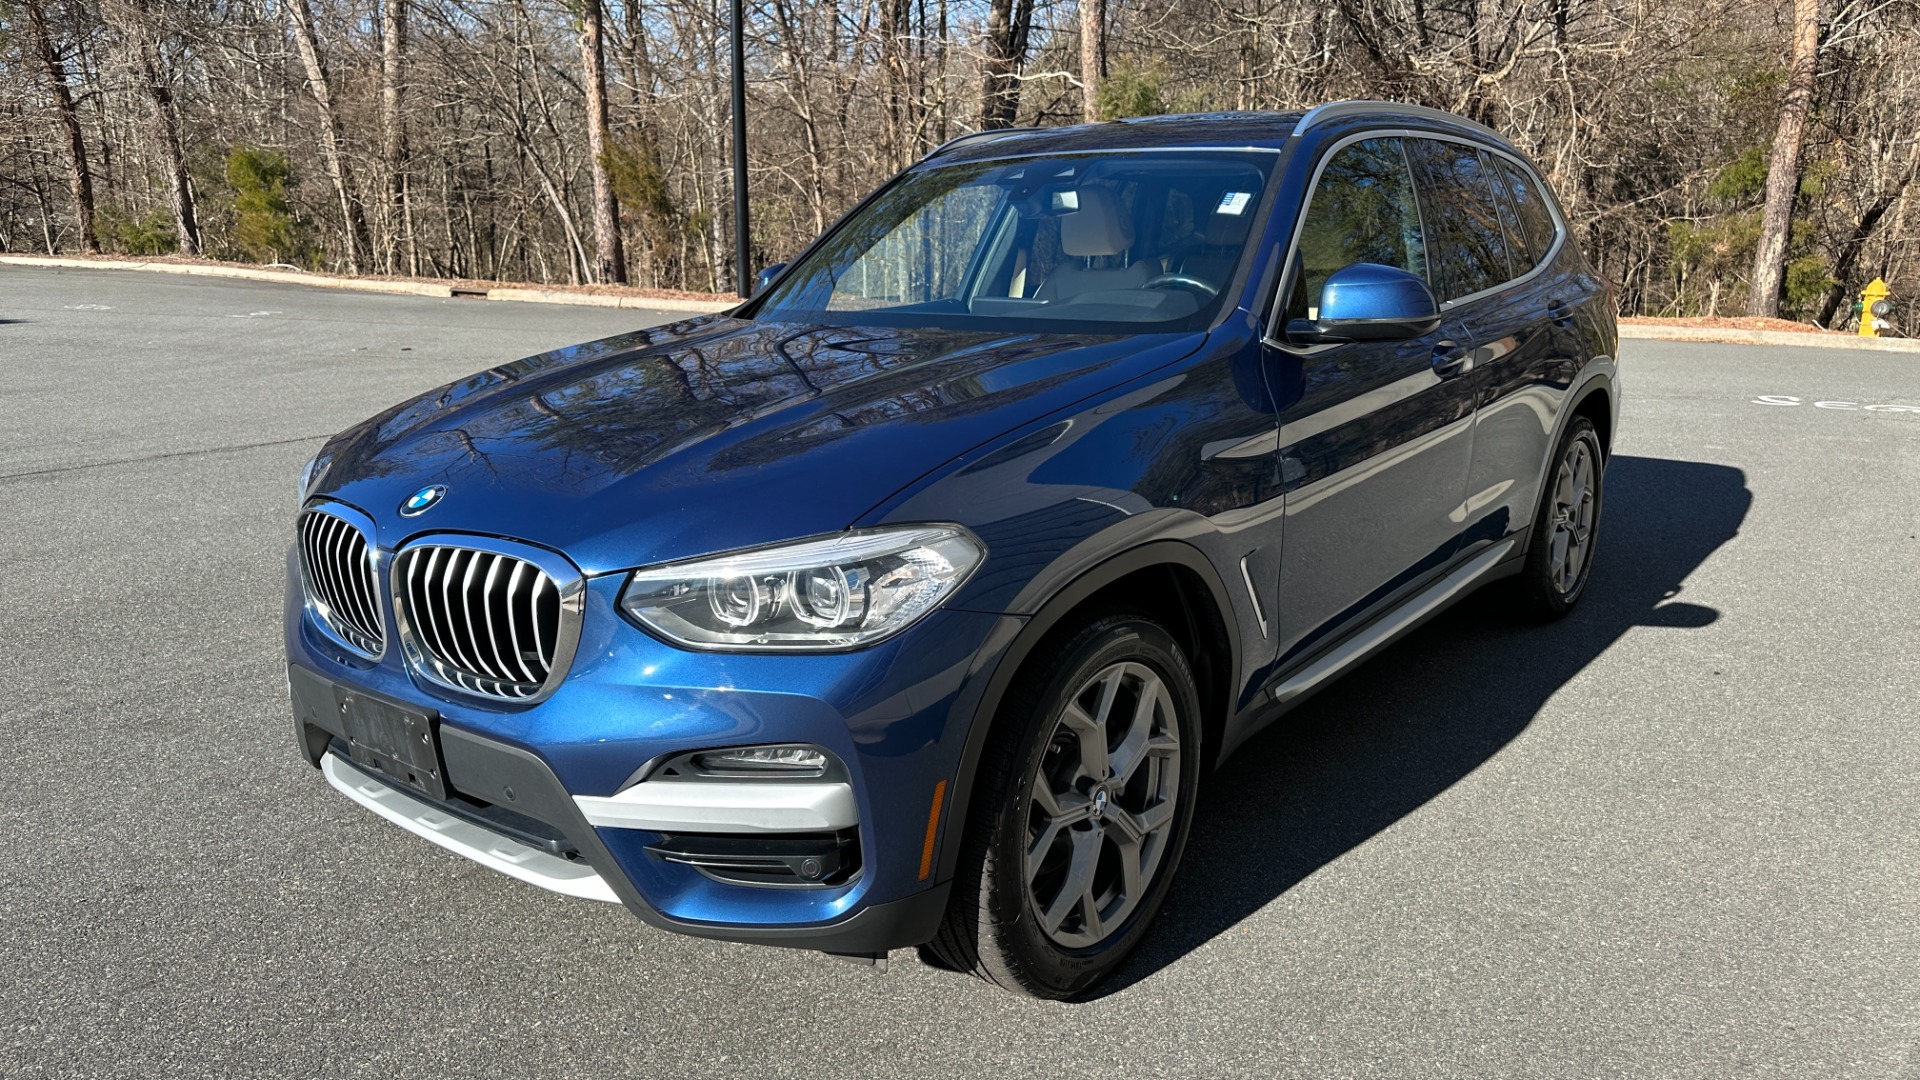 Used 2020 BMW X3 xDrive30i / DRIVER ASSISTANCE / HEATED SEATS / HEATED STEERING / NAV / COCK for sale $29,995 at Formula Imports in Charlotte NC 28227 5